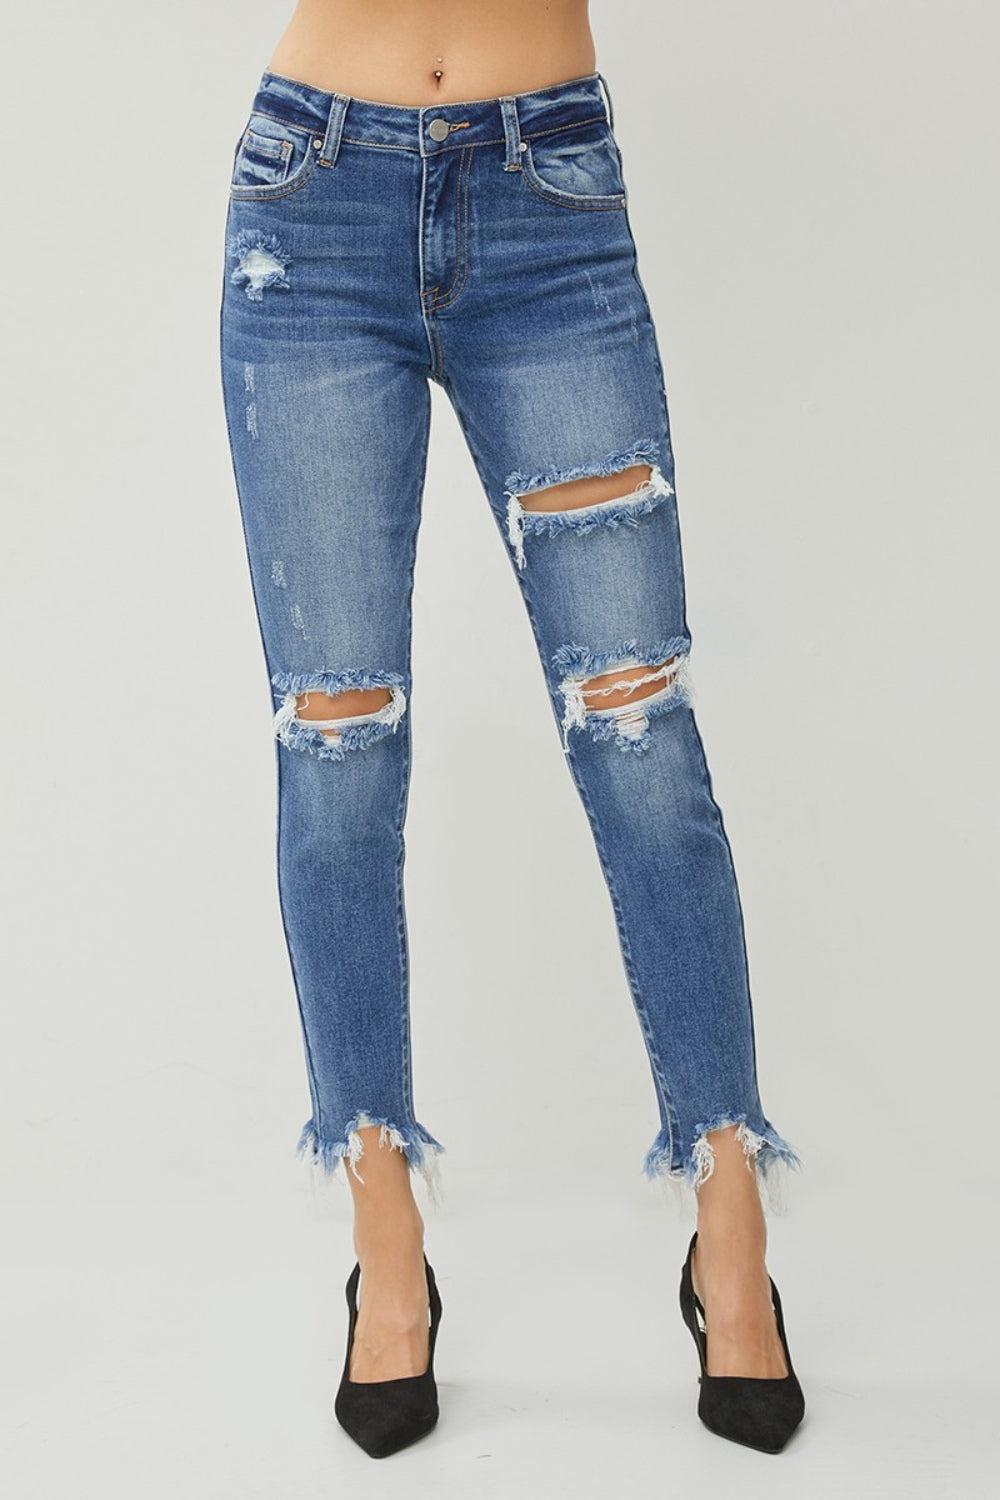 a woman wearing ripped jeans and heels